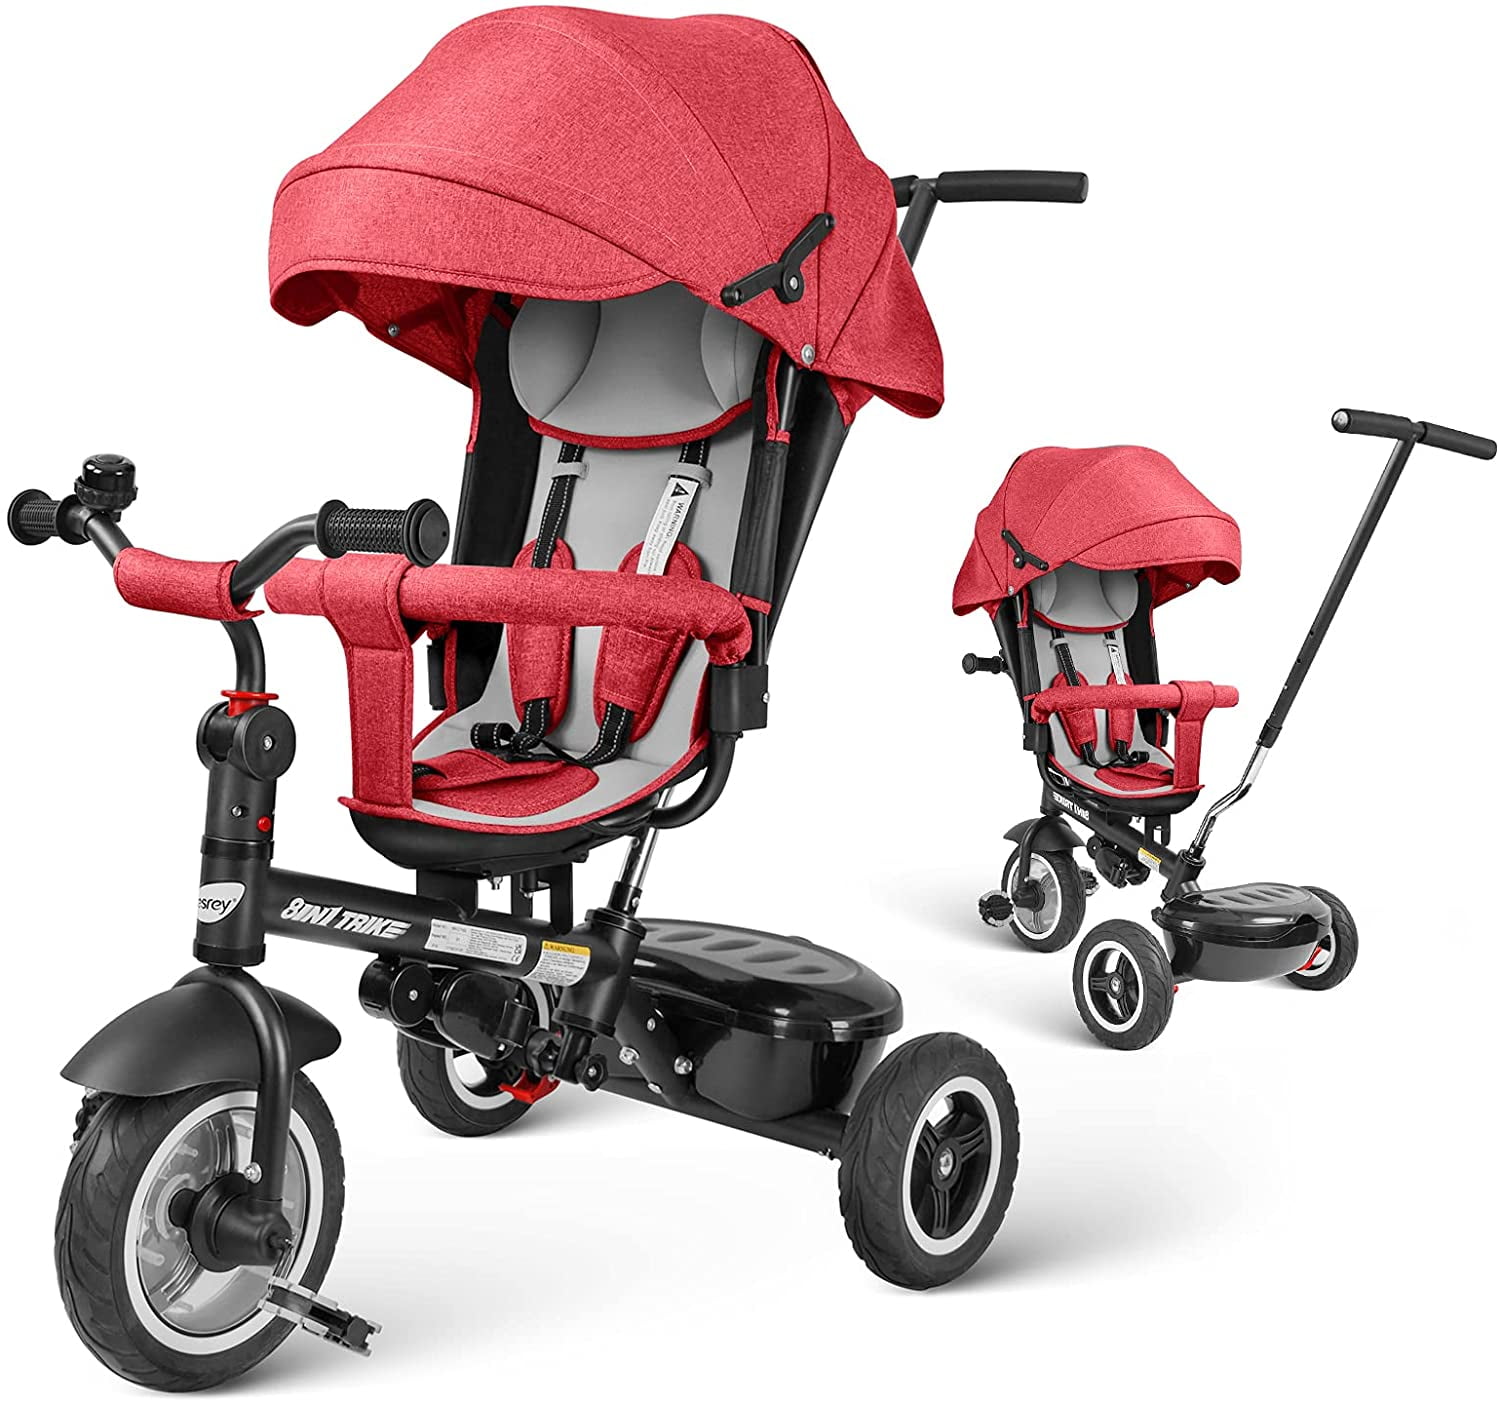 besrey 7 in 1 Trike Tricycle Baby Walker Bike Kids Push Stroller with Rotating and Reclining Seat Gray/Red